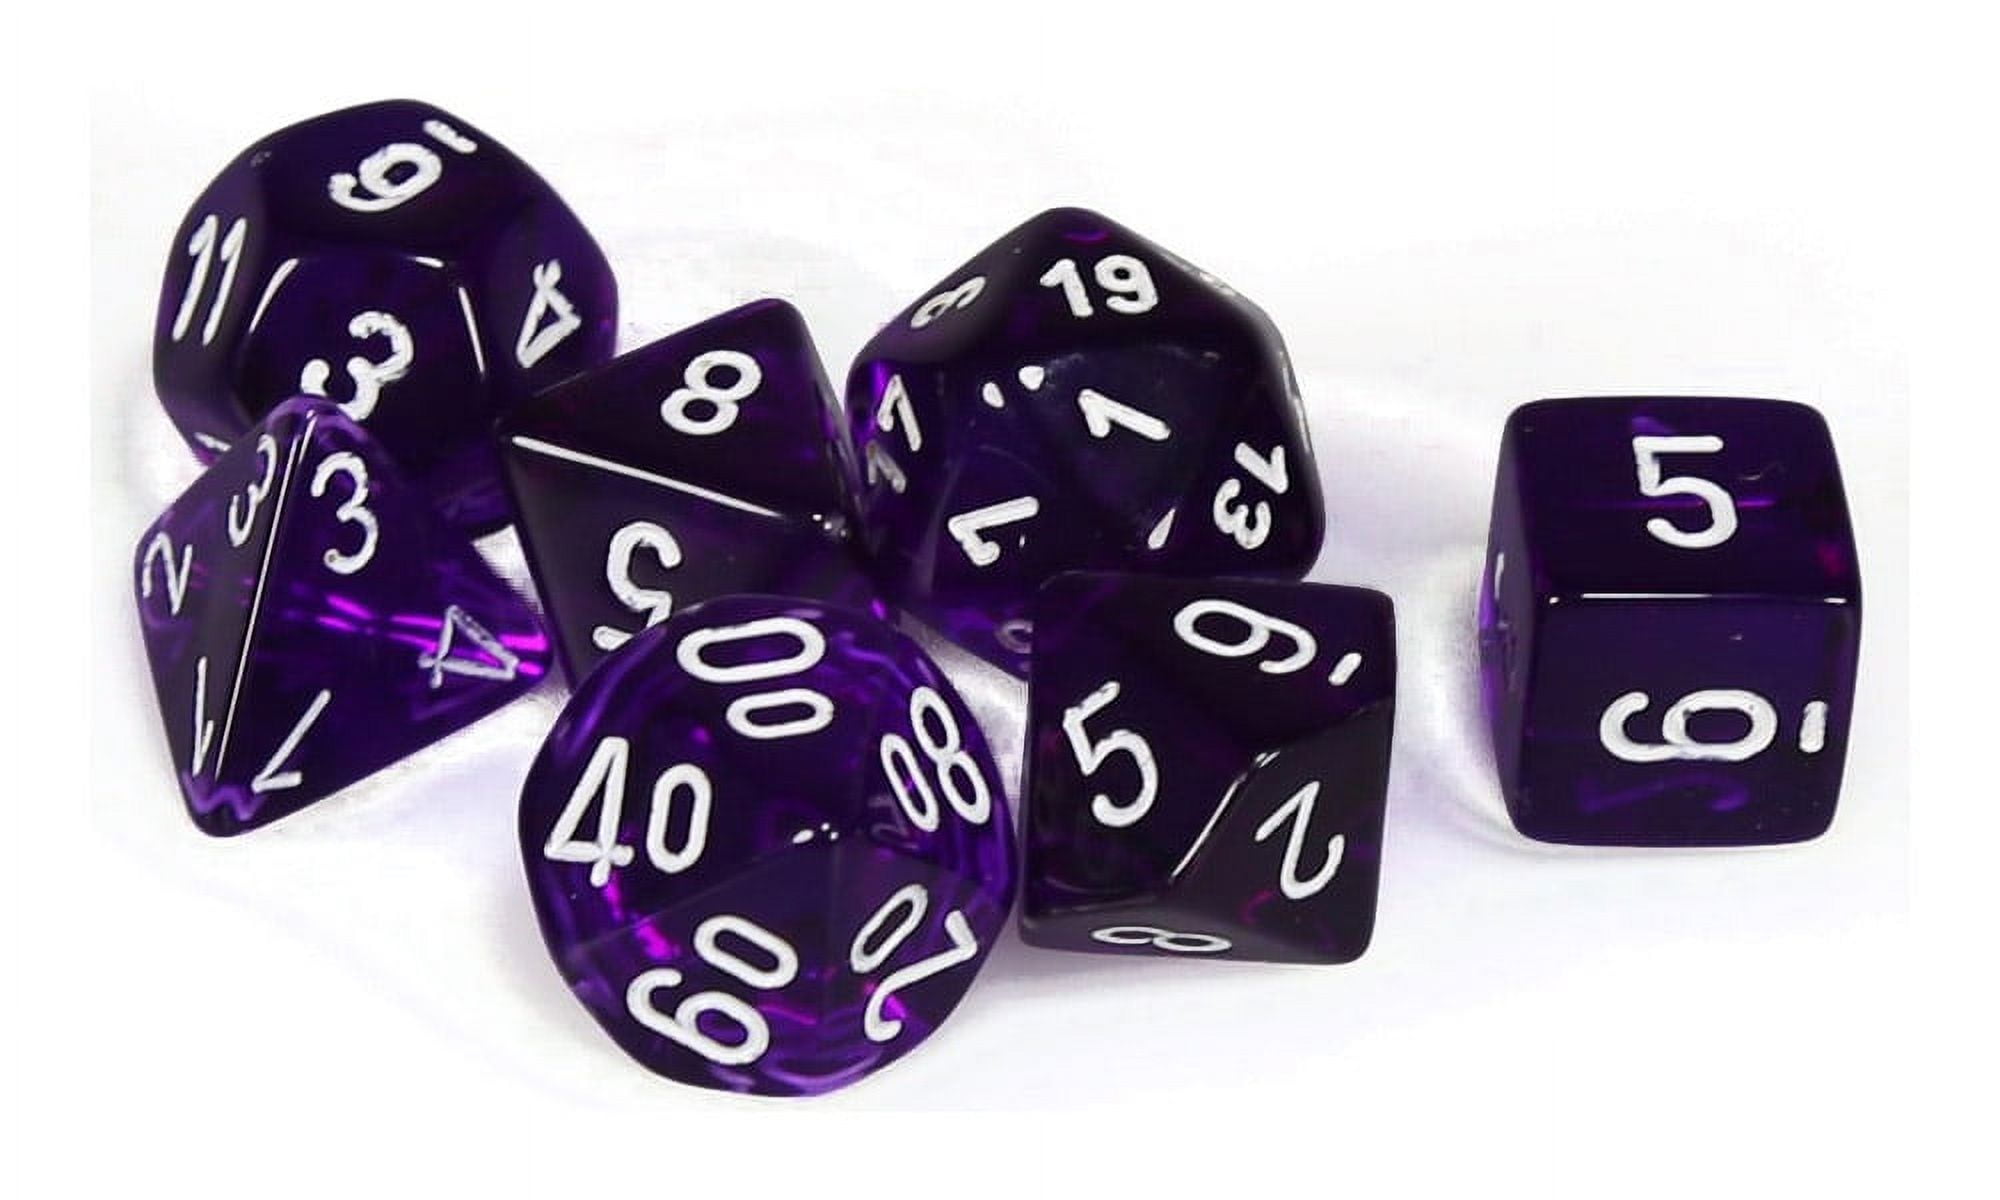 Manufacturing Chx23077 Purple Translucent Dice With White Numbers - Set Of 7